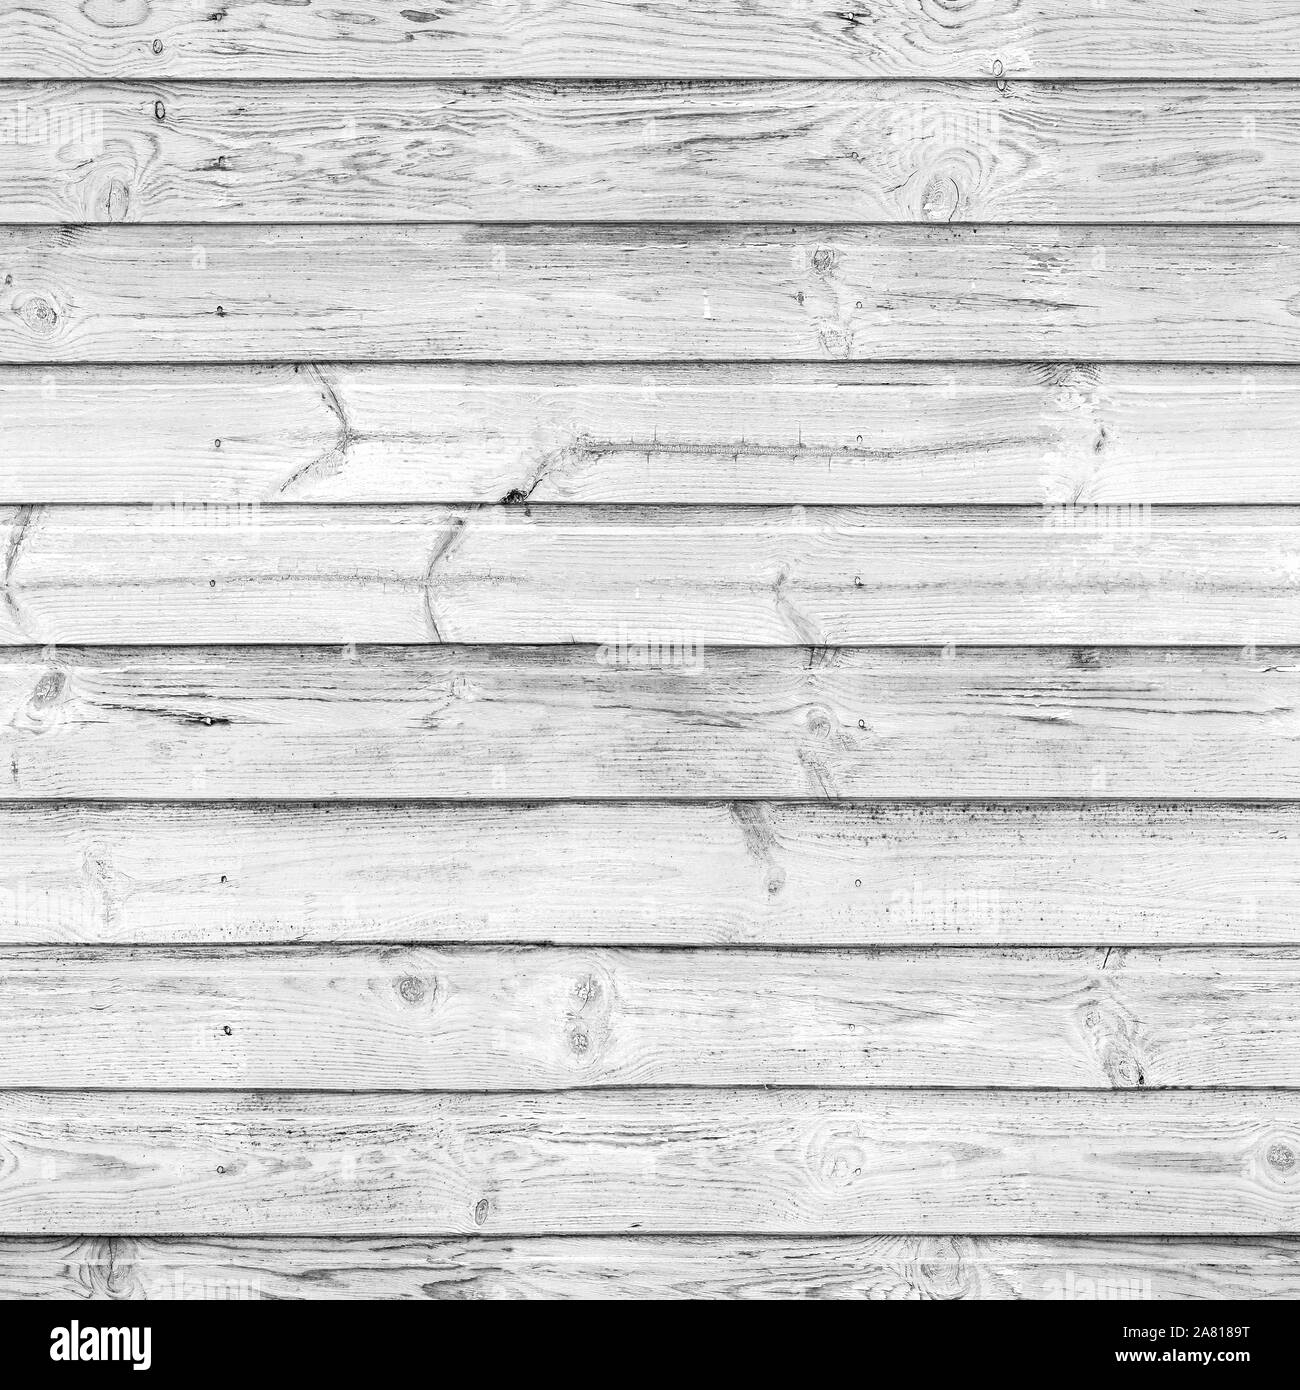 White wooden wall, frontal view, square seamless background photo texture Stock Photo